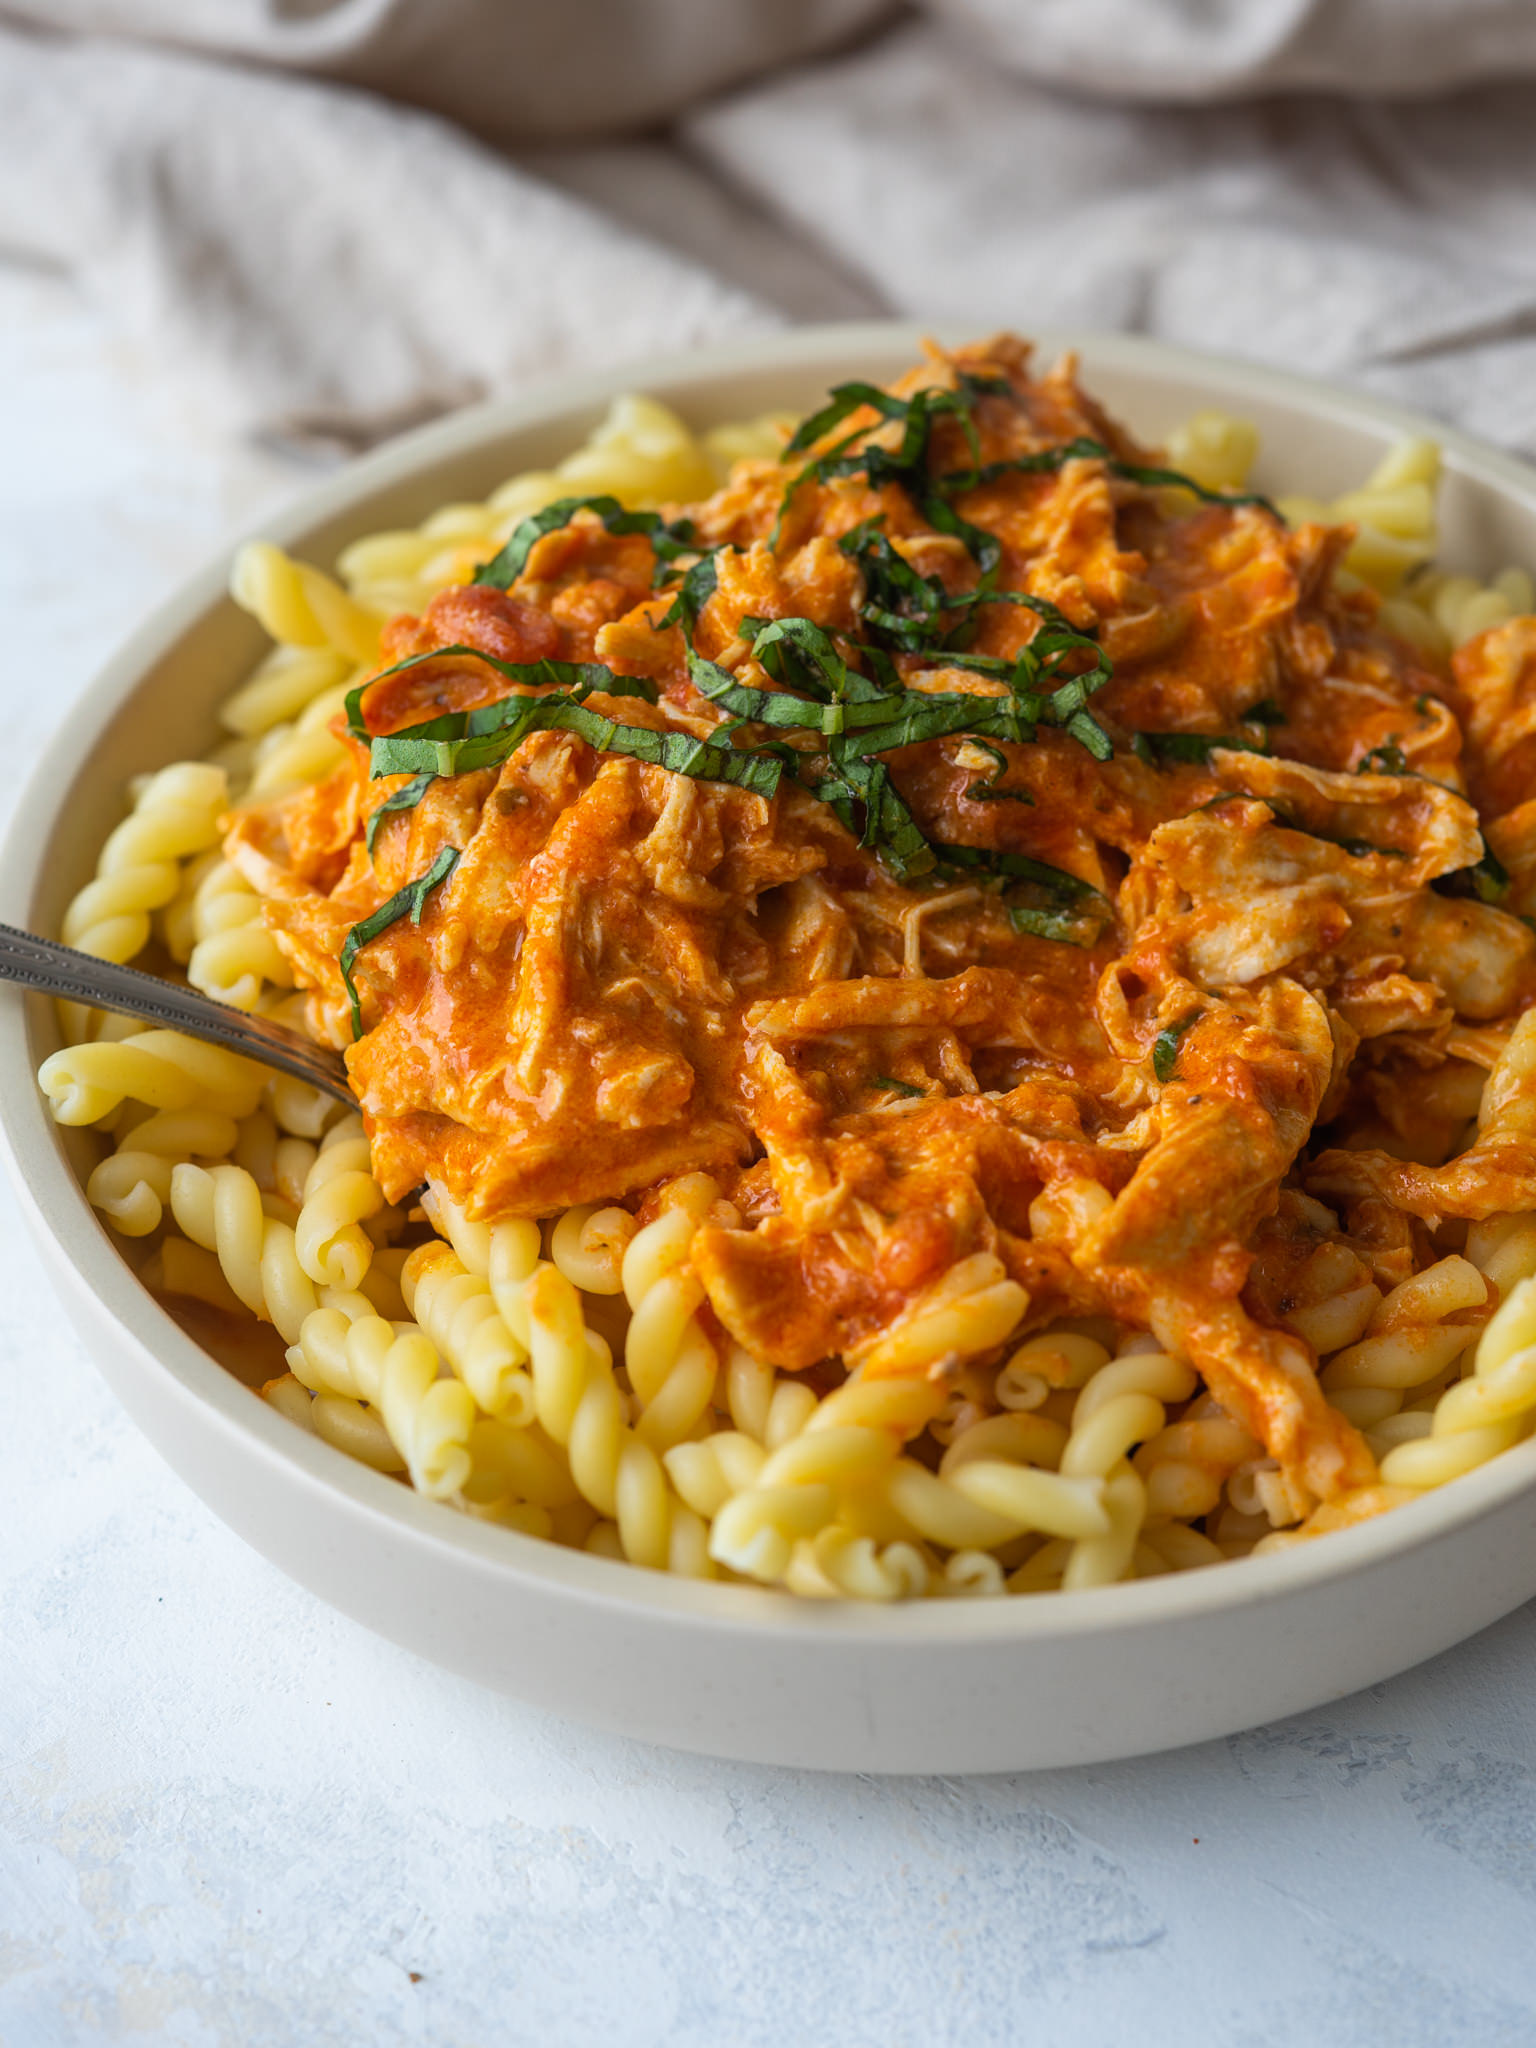 a three quarter view photo of creamy shredded chicken pasta sauce on pasta in a white bowl